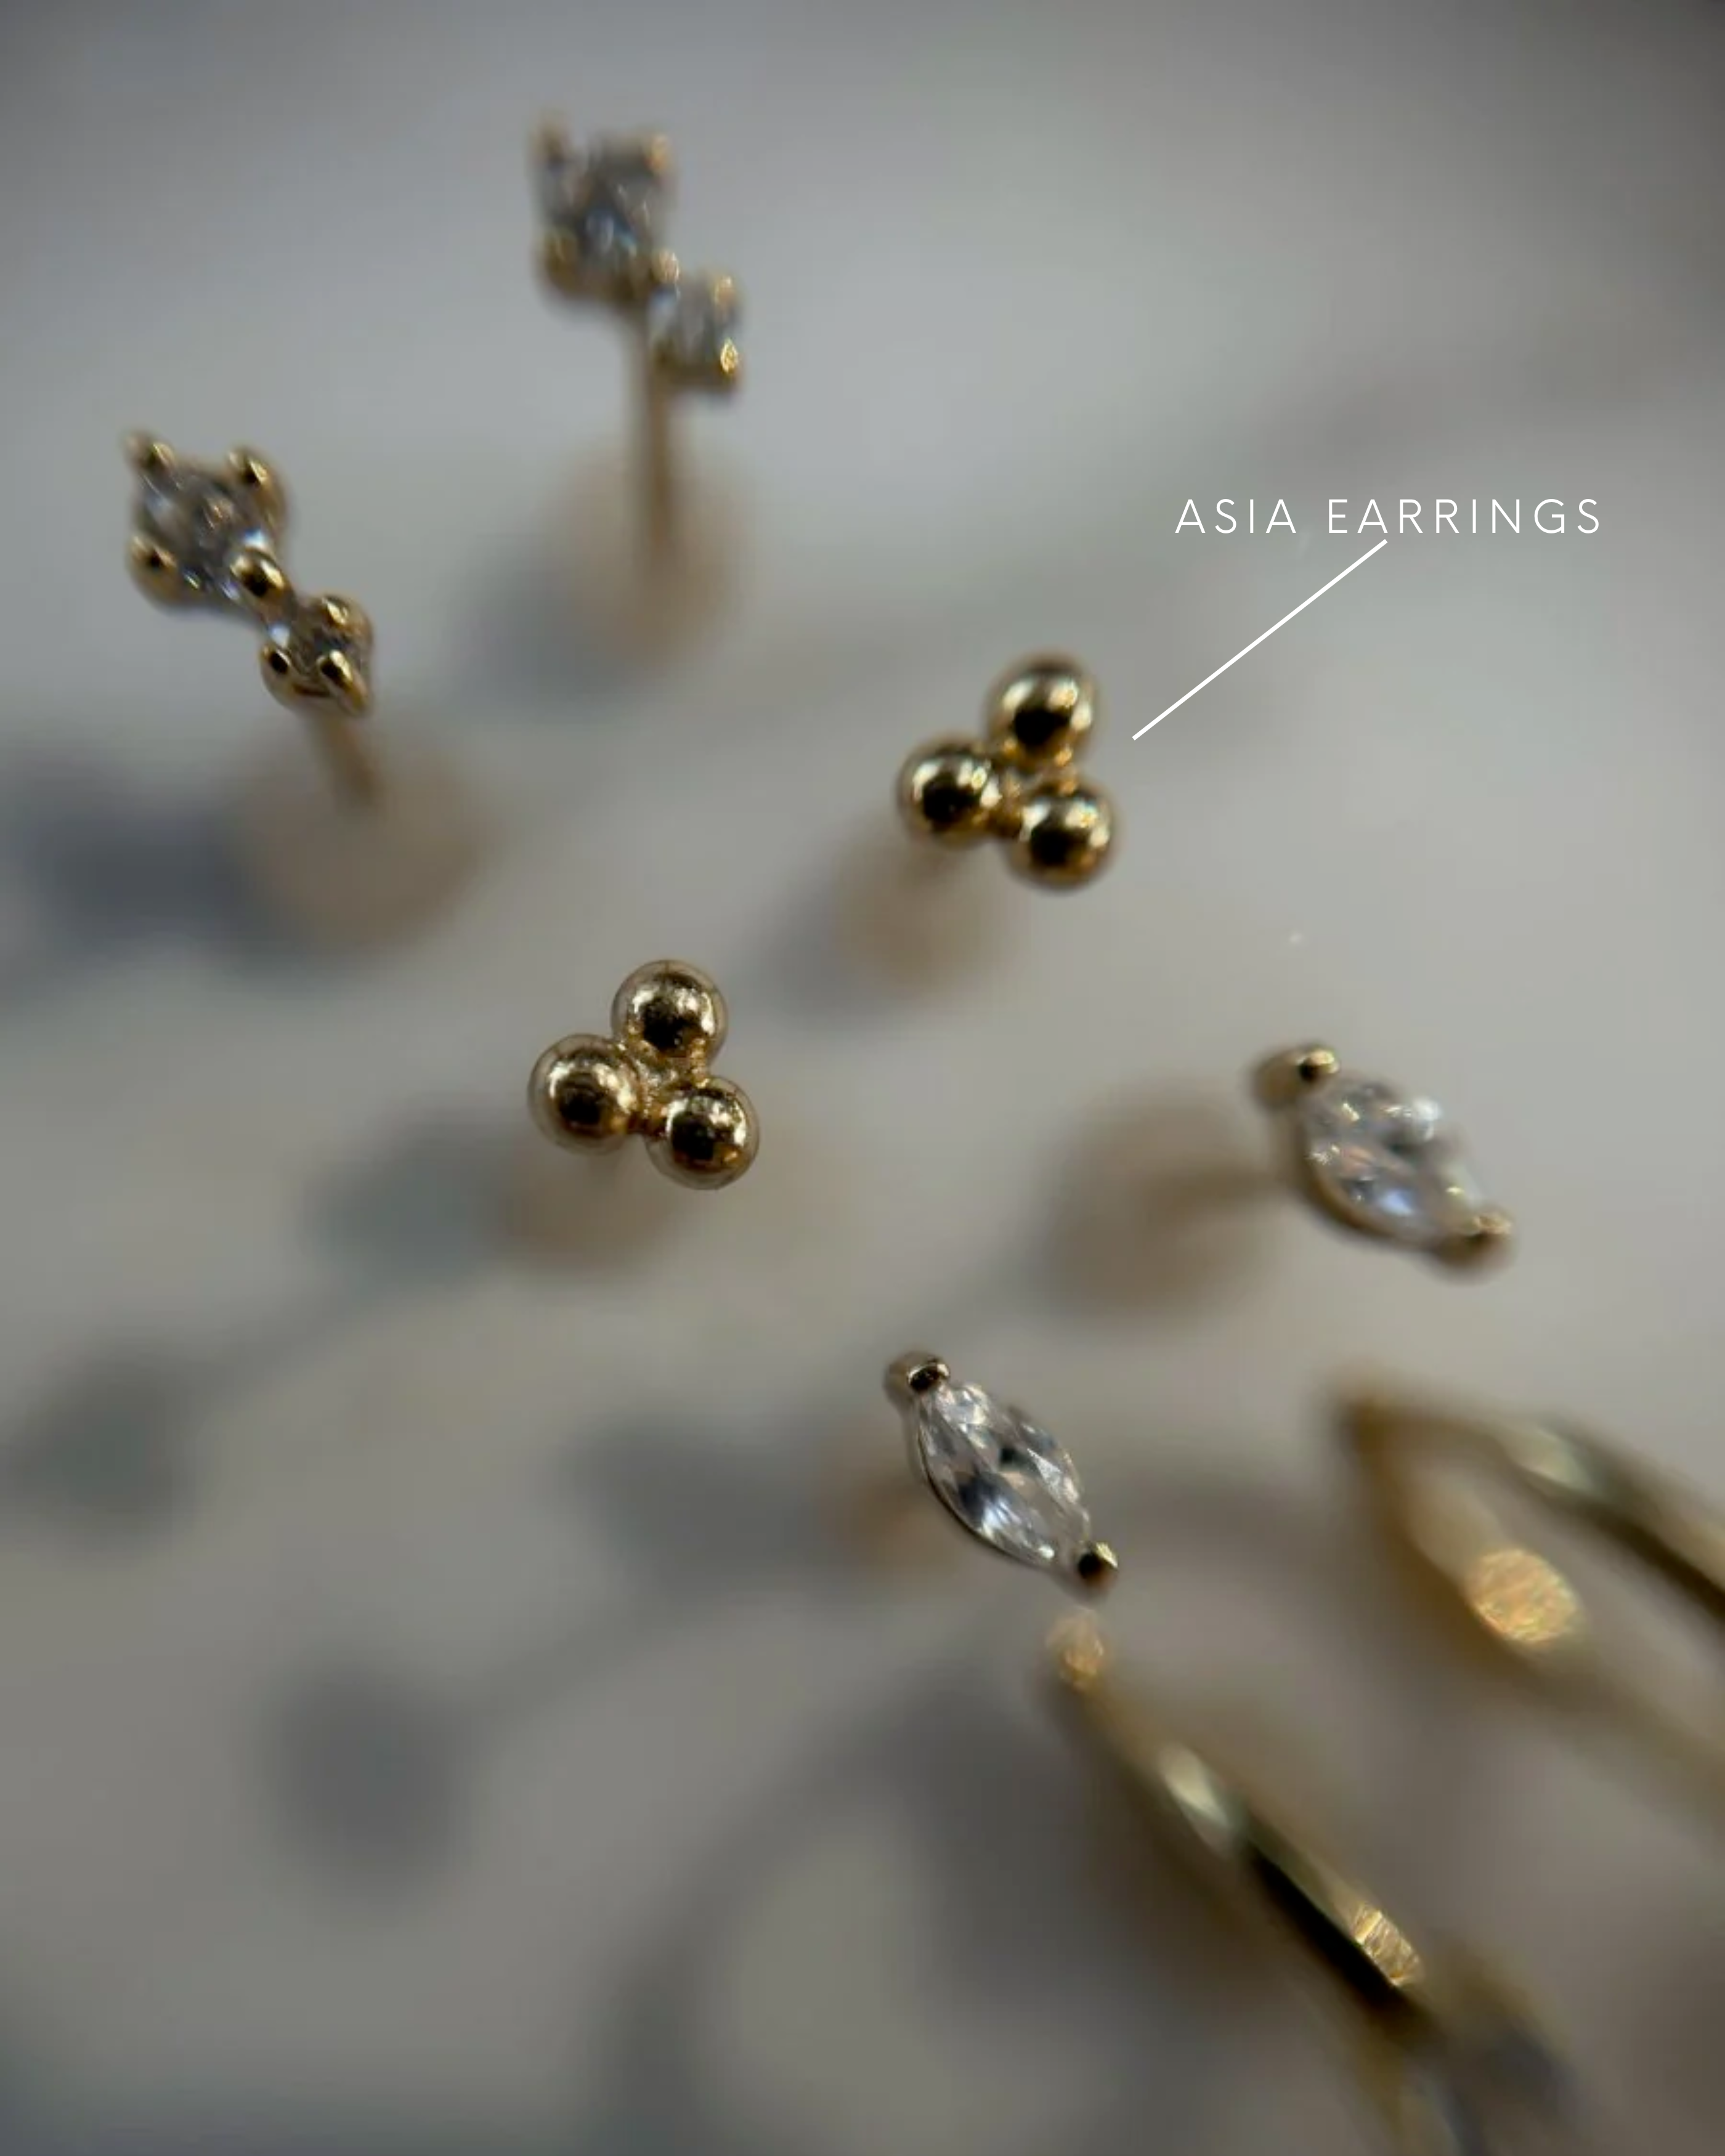 Five and Two Asia Earrings